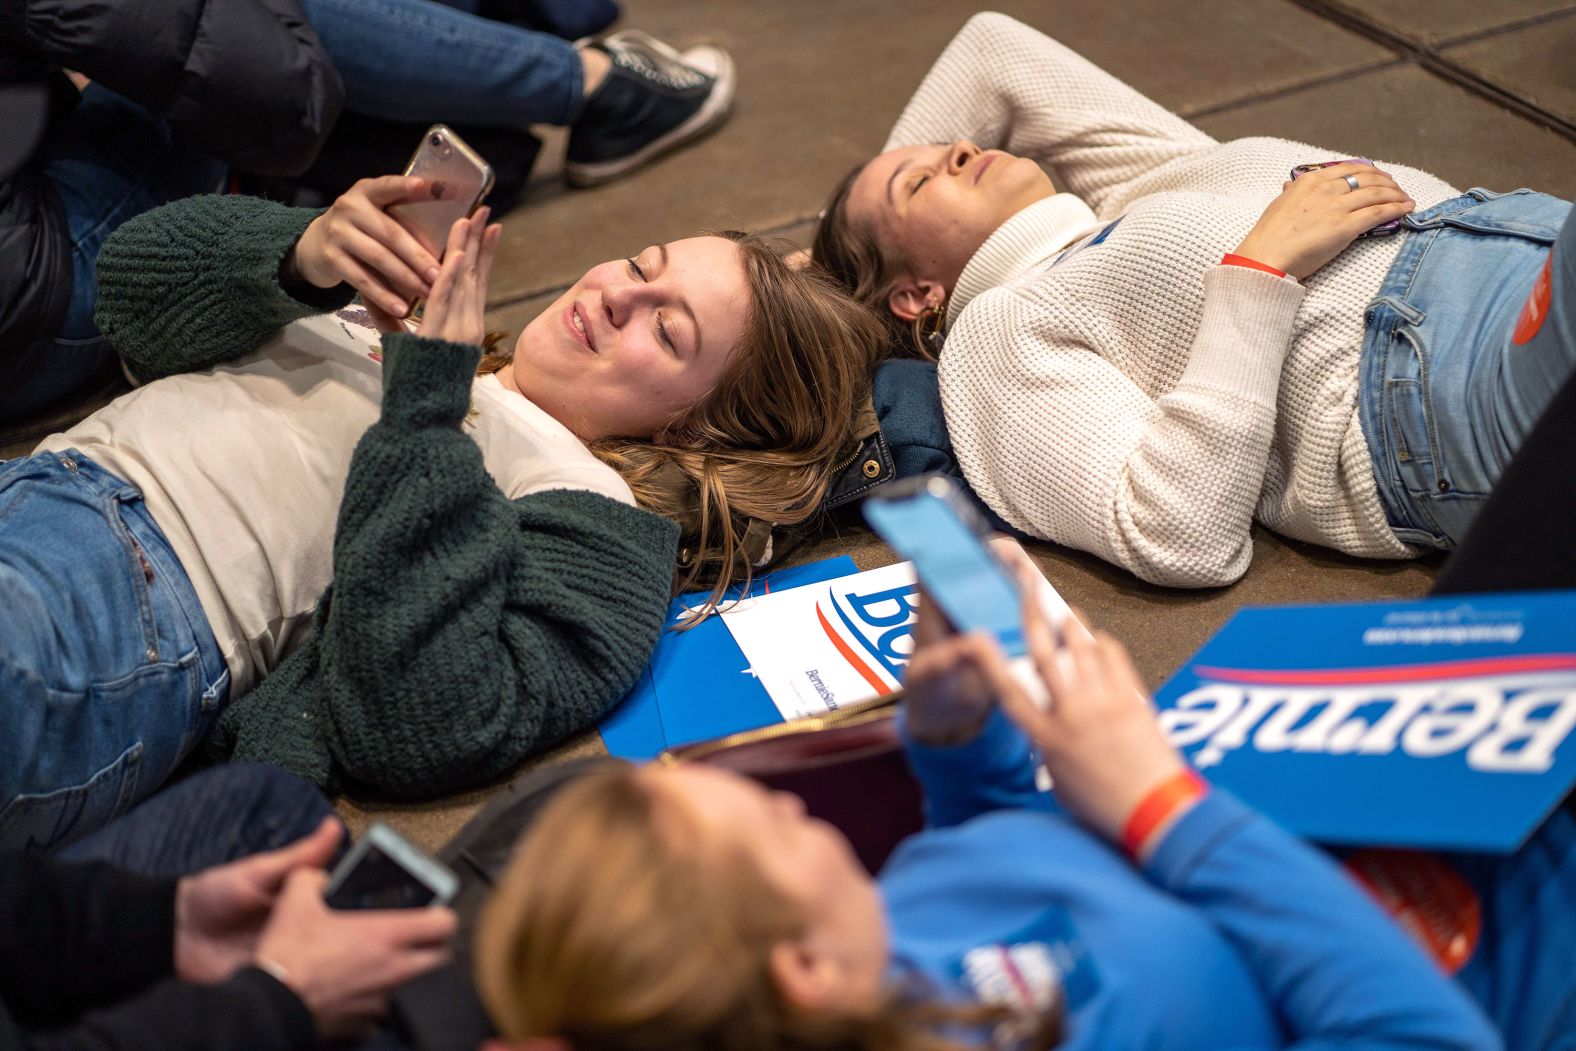 Sanders supporters wait for the start of a campaign rally in St. Paul, Minnesota, on Monday.